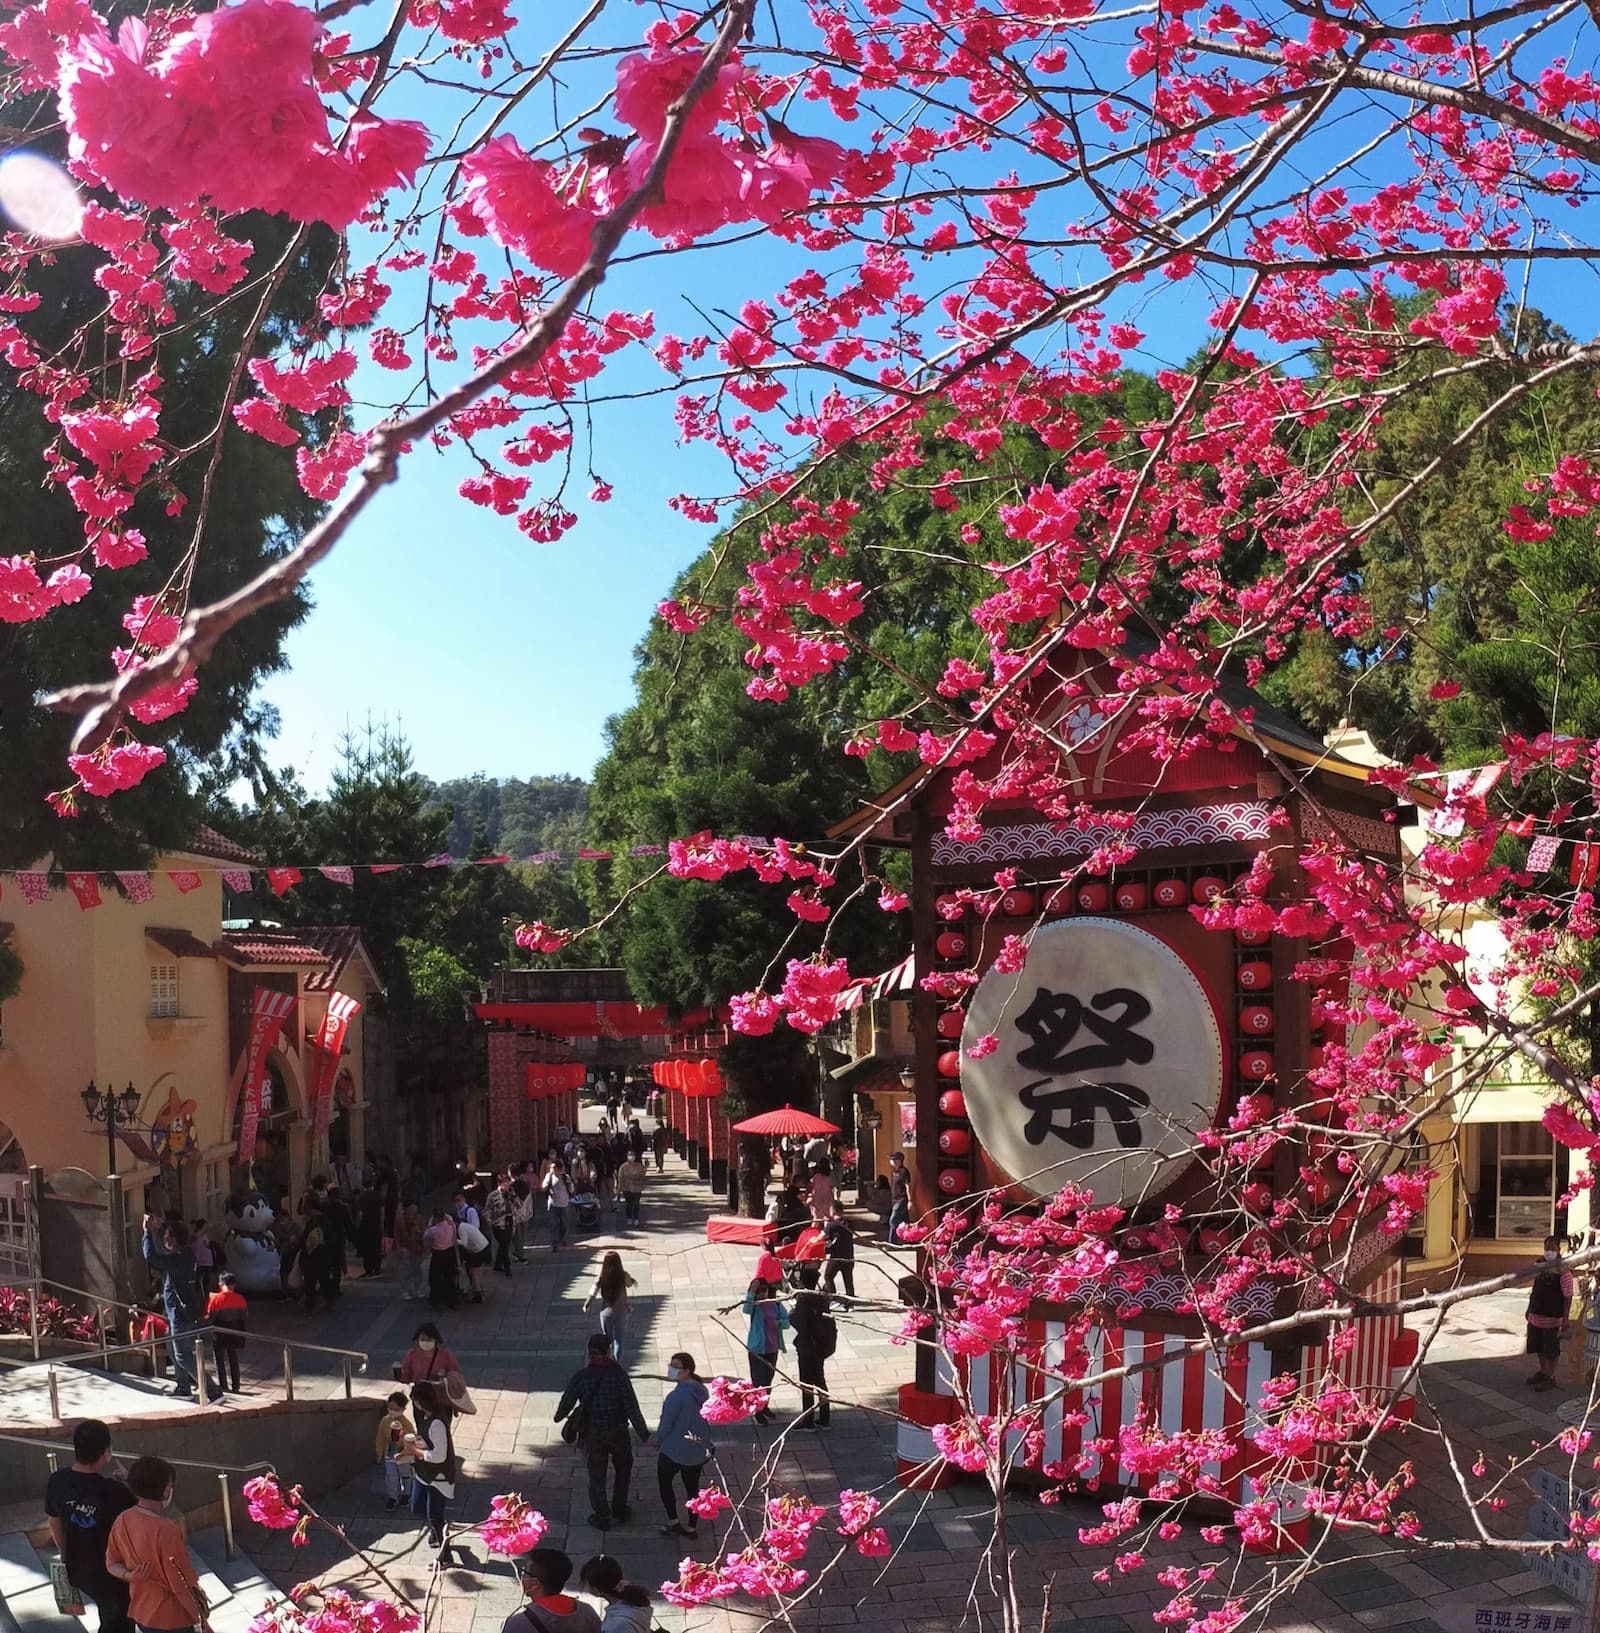 The cable car passes above the cherry blossom trees.